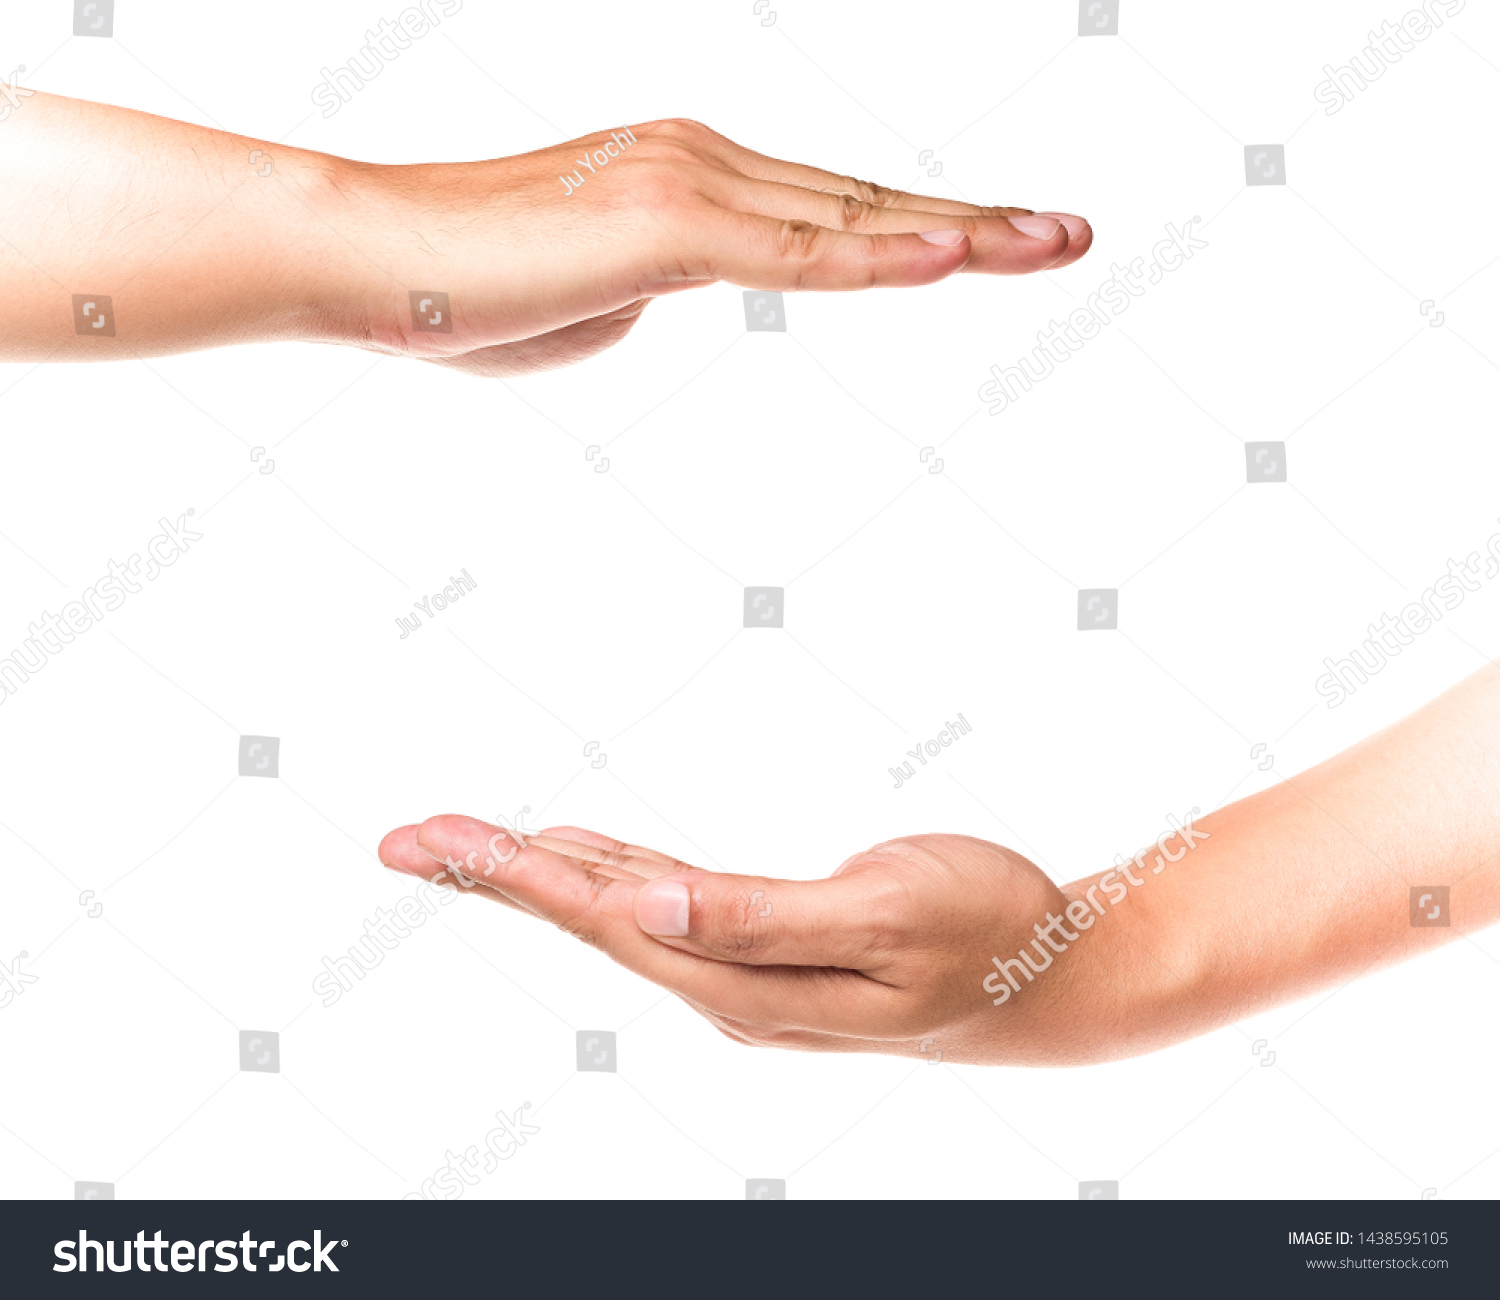 Hands showing gestures, protection or measuring size of something. Isolated background. #1438595105